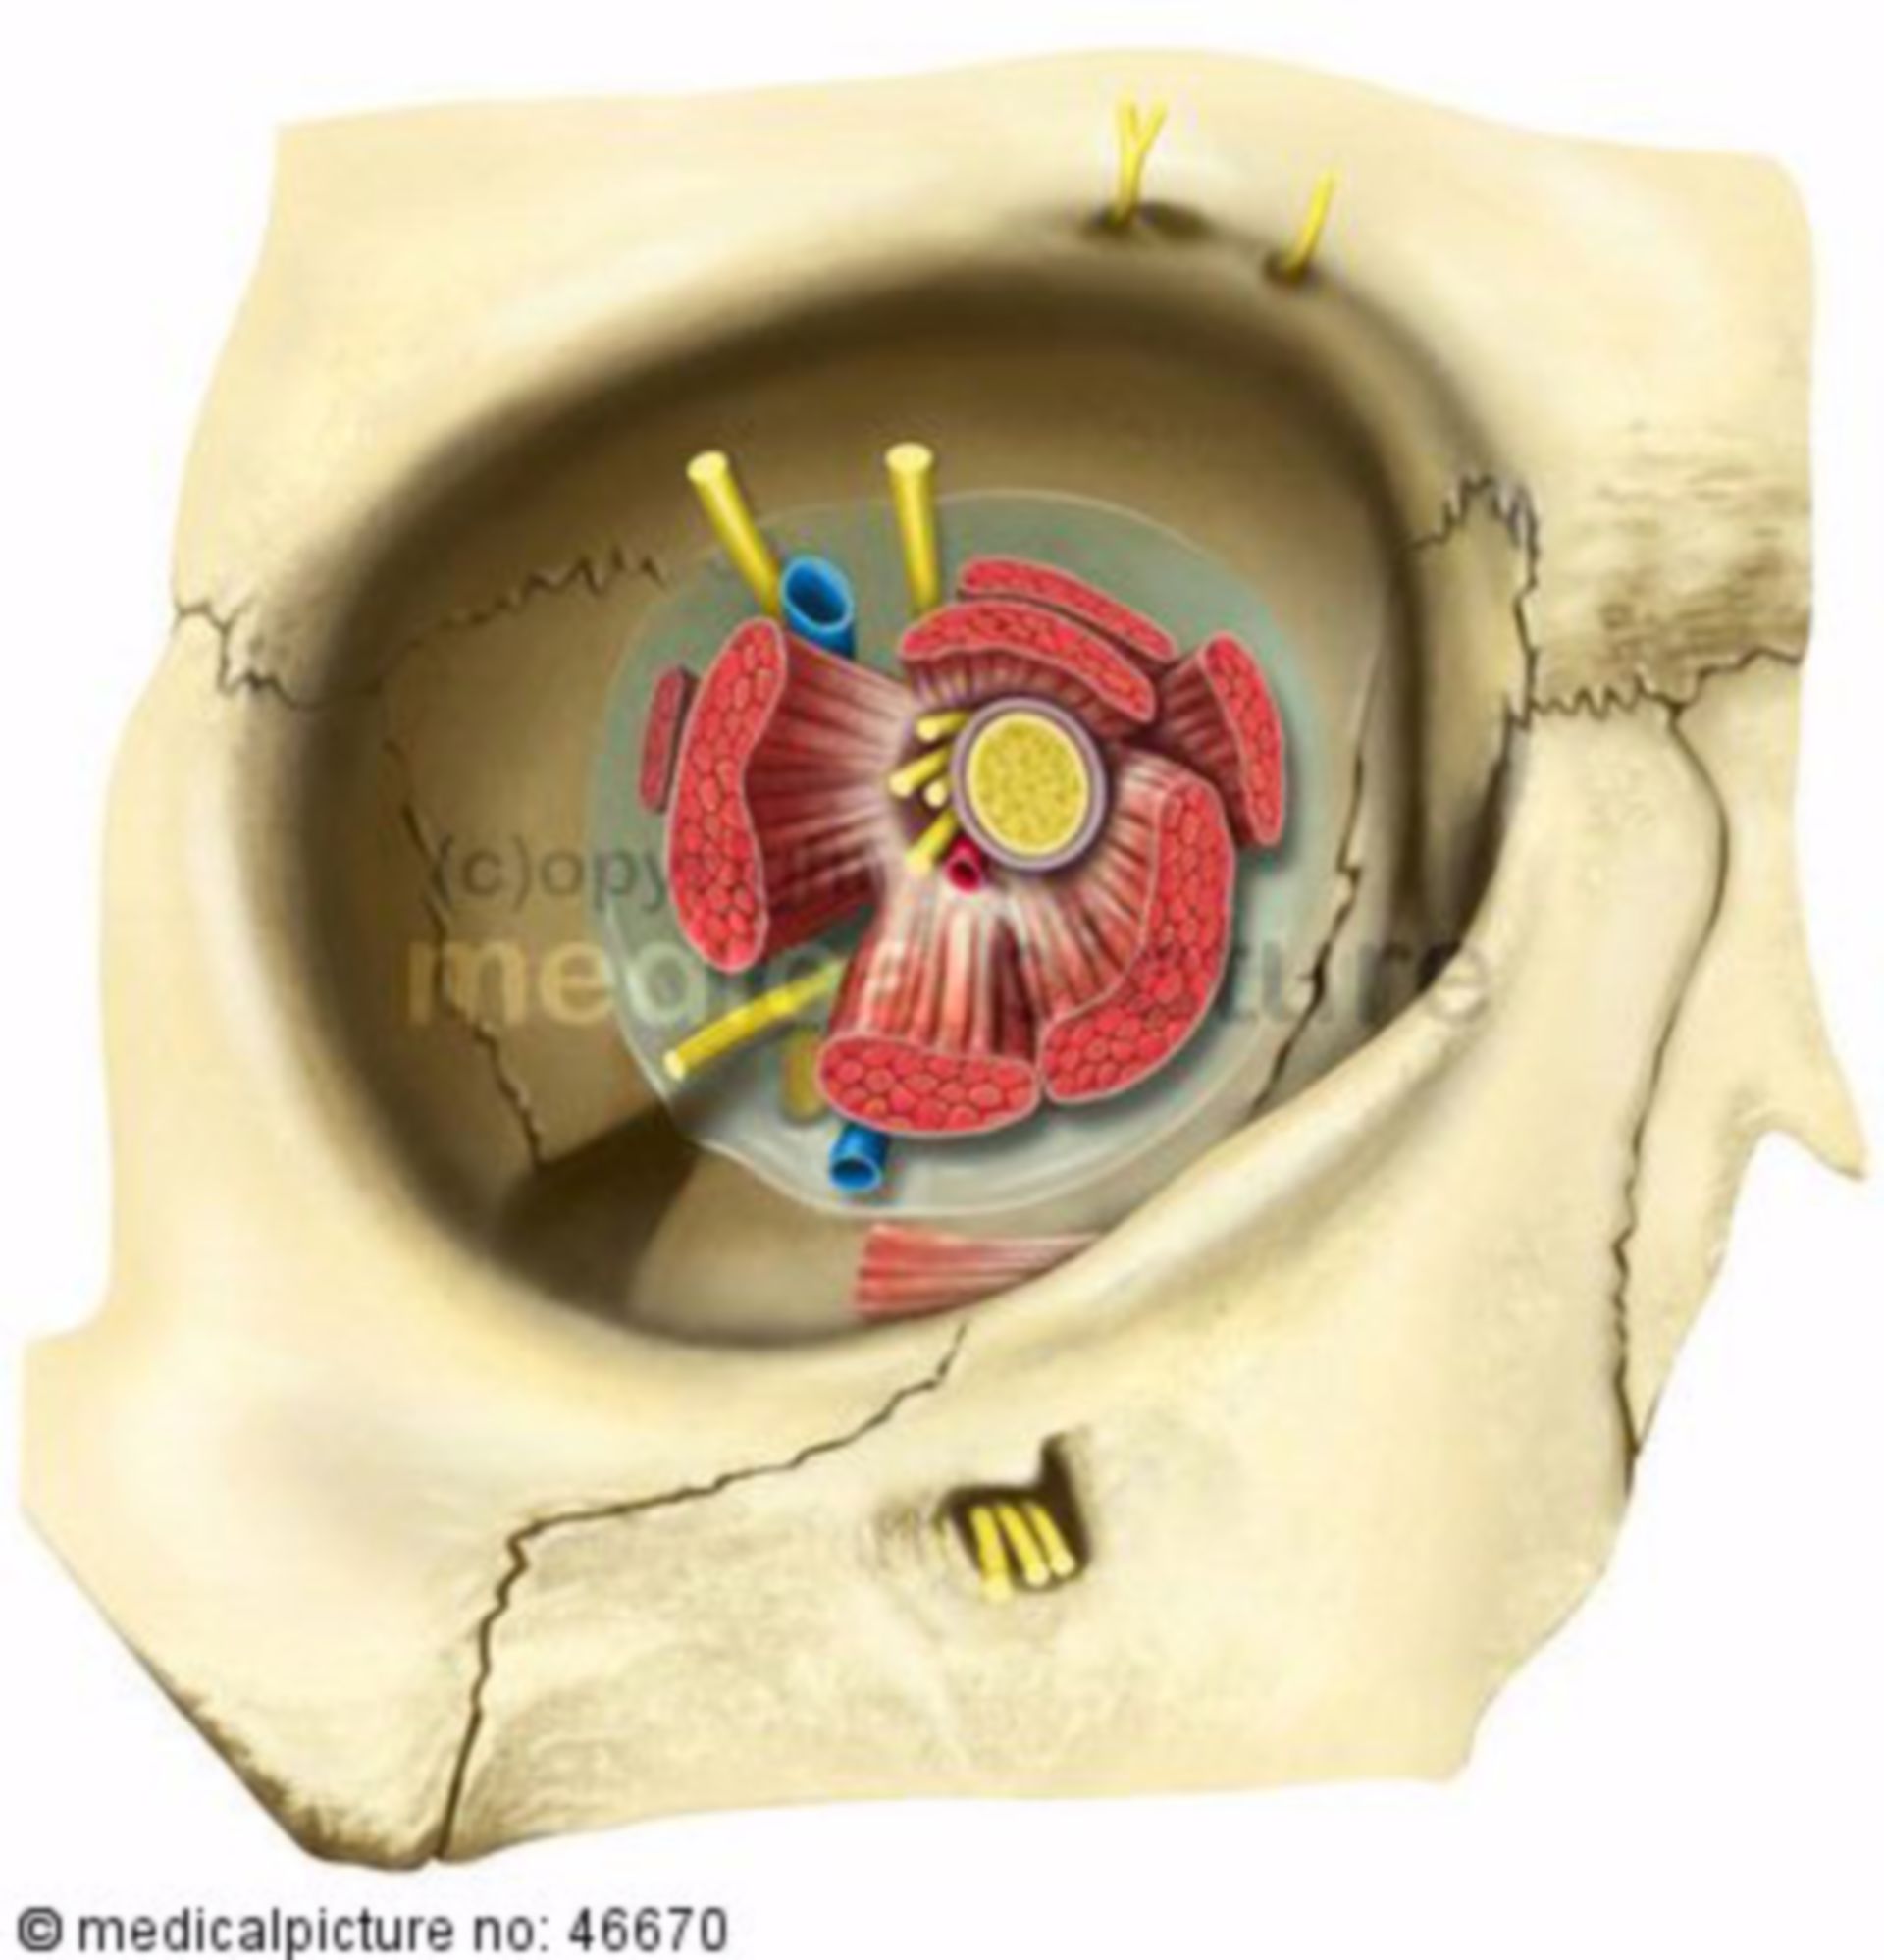 Right eyehole with nerves and muscles, Orbita